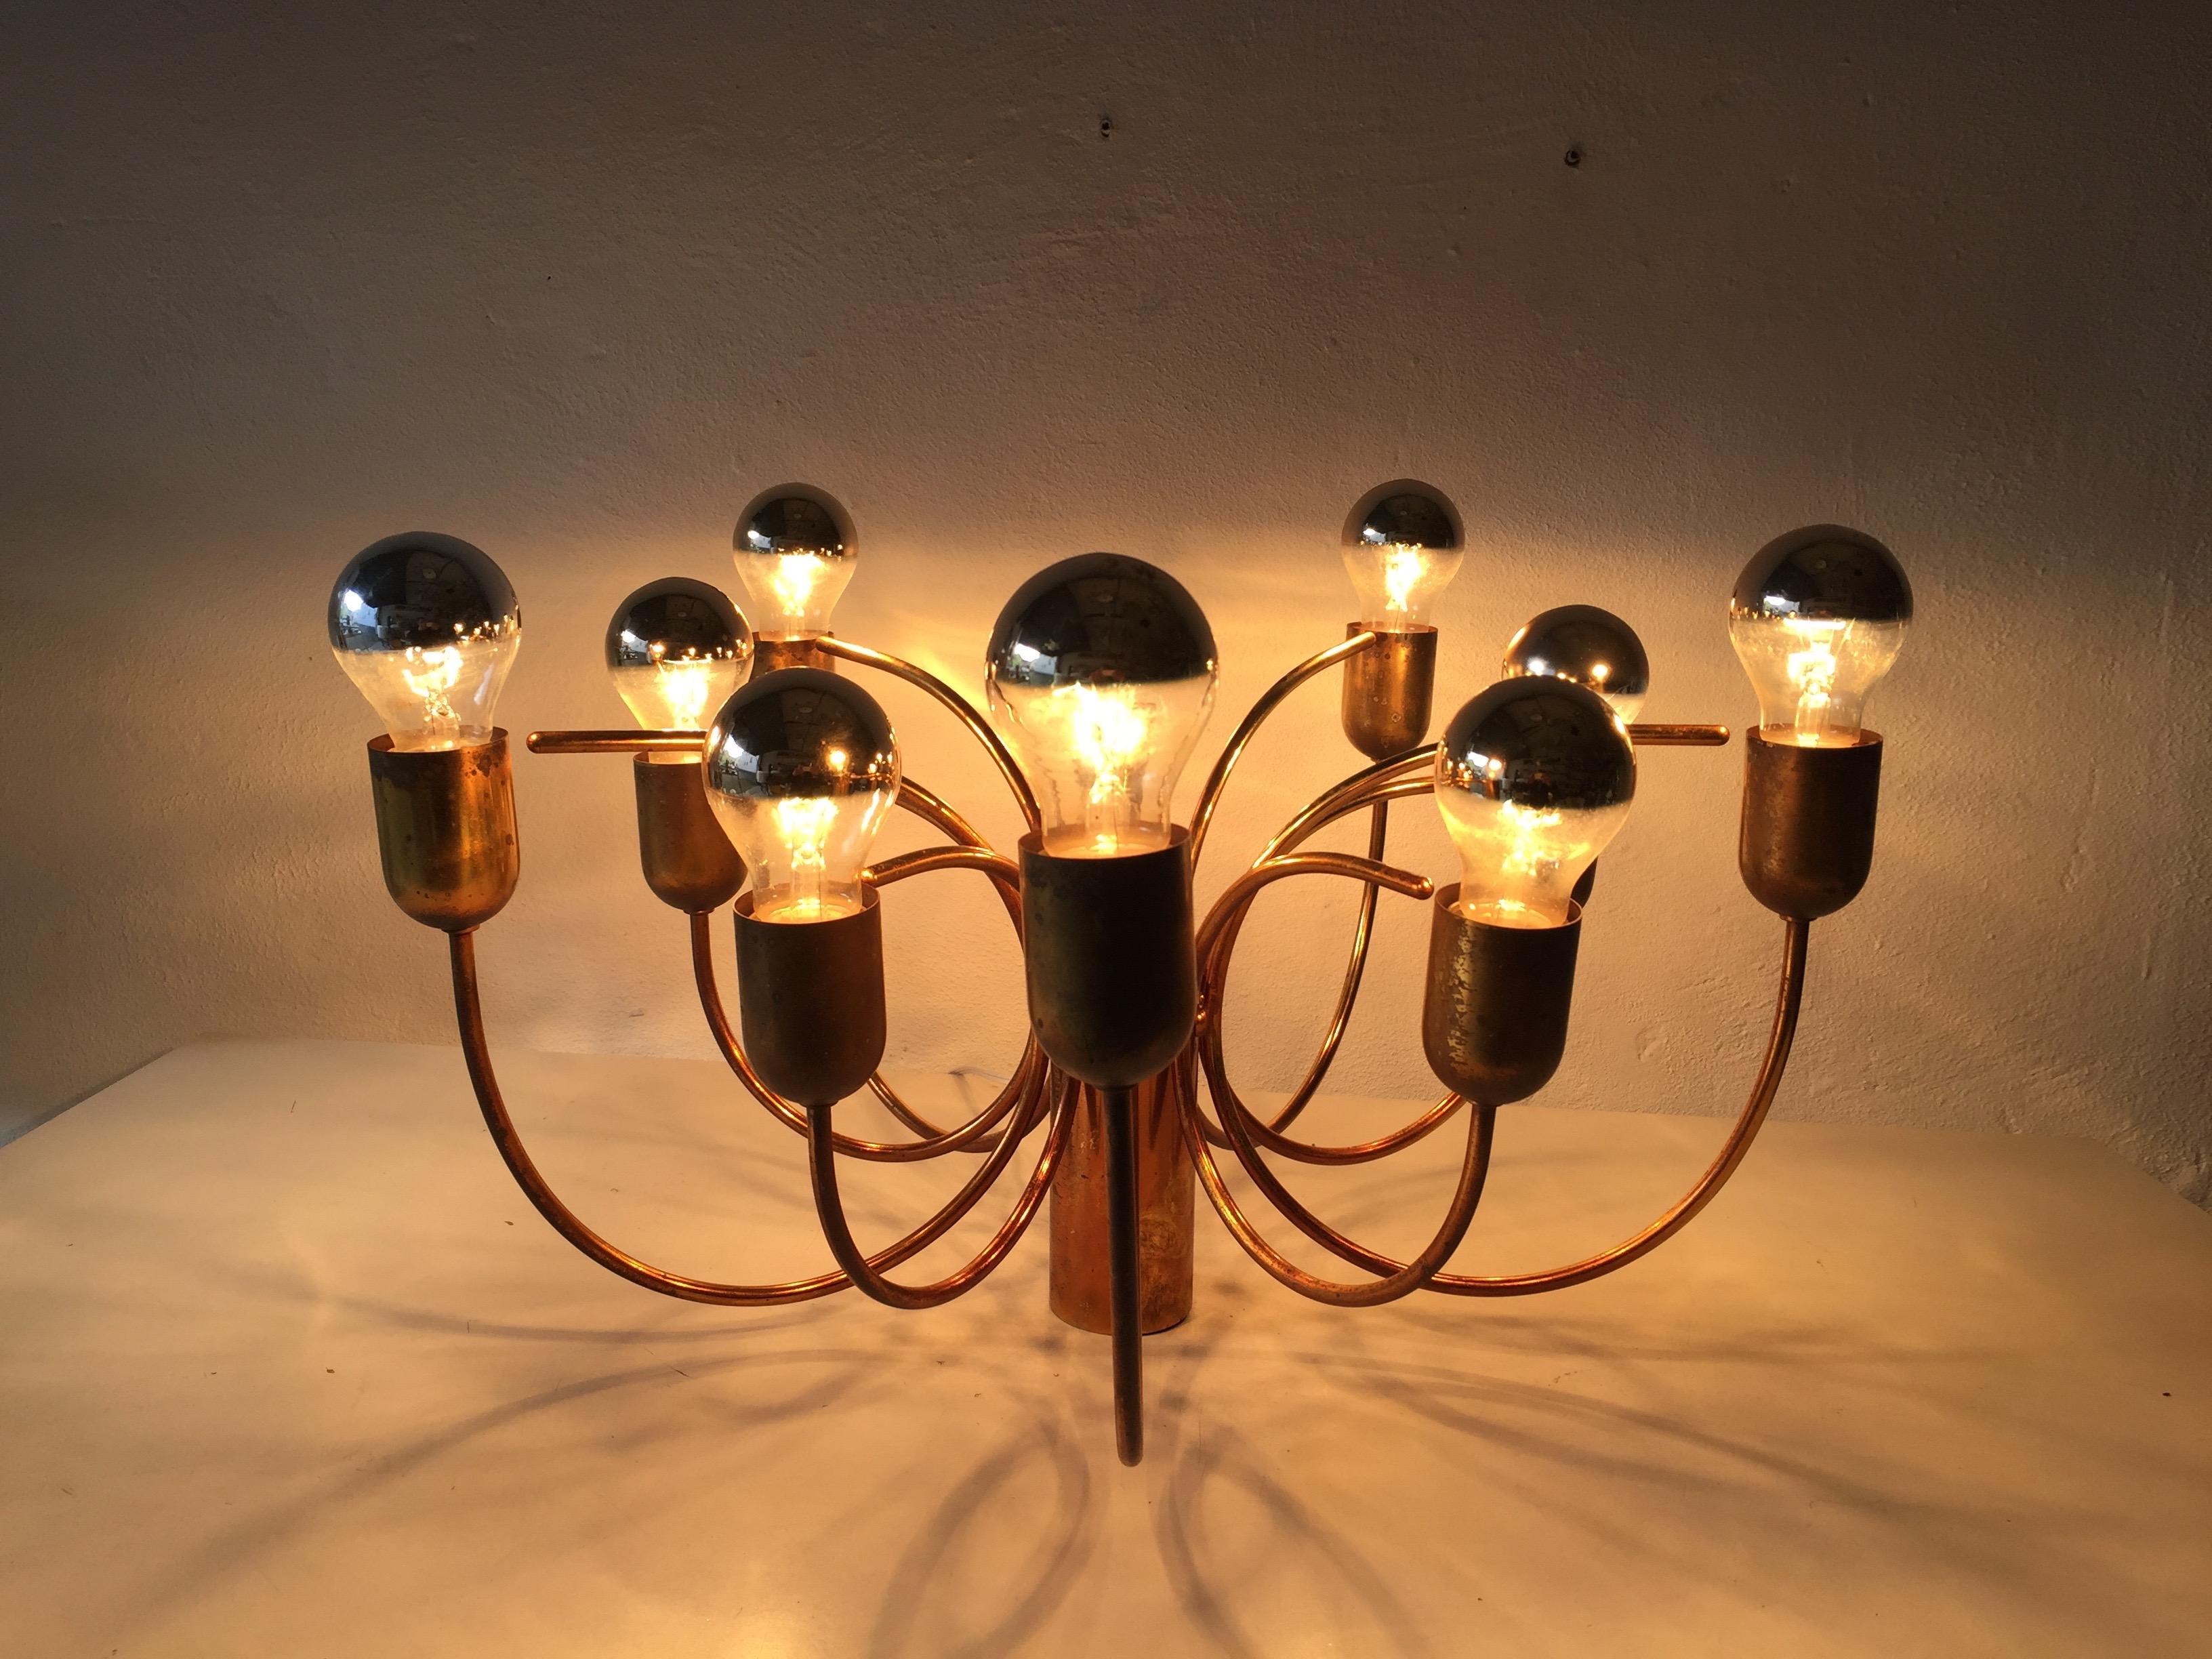 Rare 10 Arc Shaped Arms Full Brass Chandelier by Cosack Leuchten, 1970s Germany For Sale 9